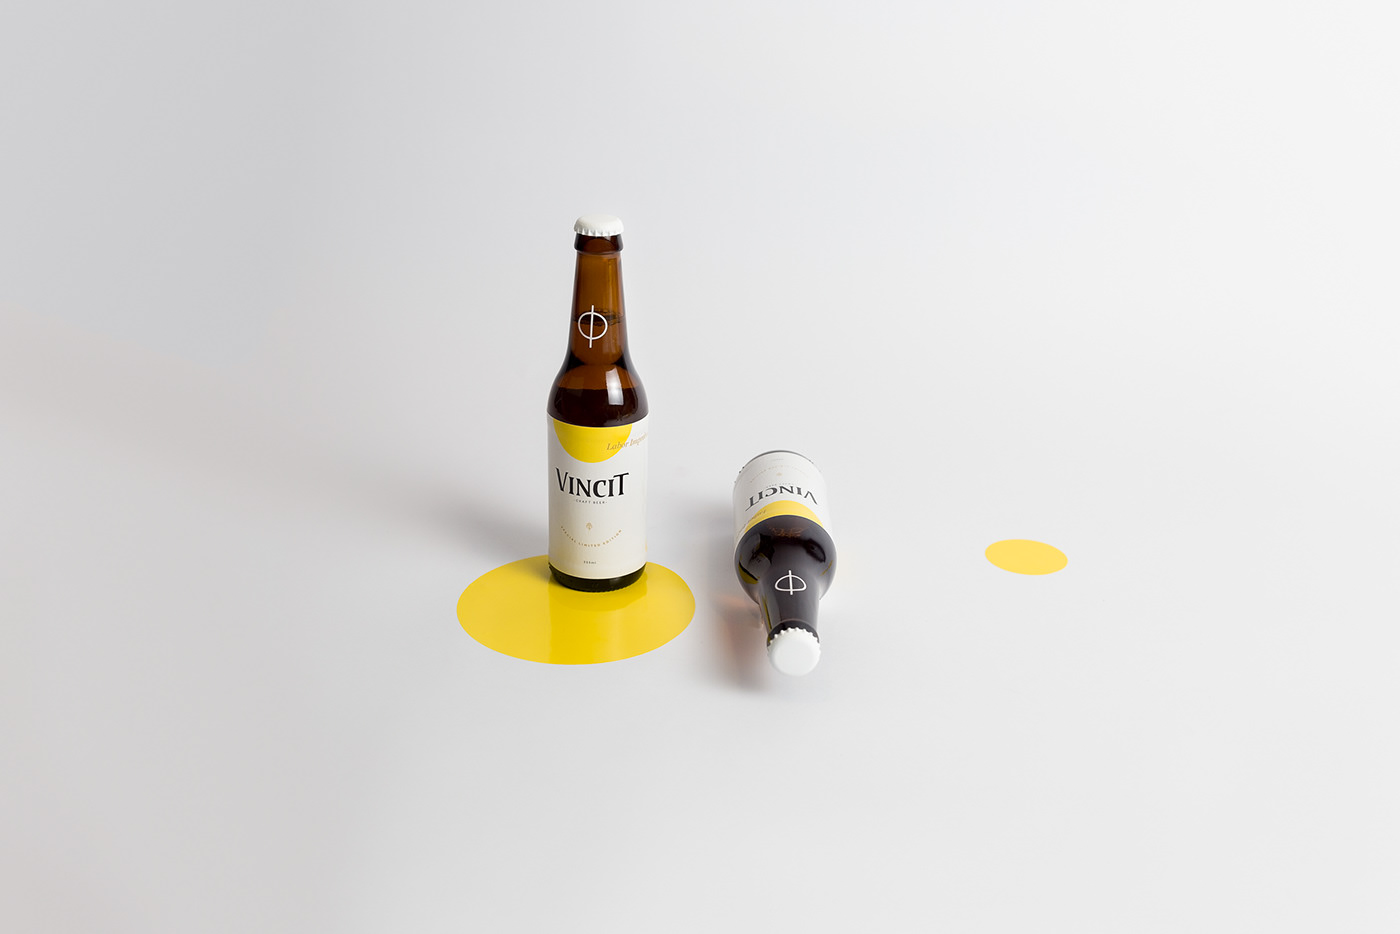 Two labeled beer bottles on a plain background with colored circles.